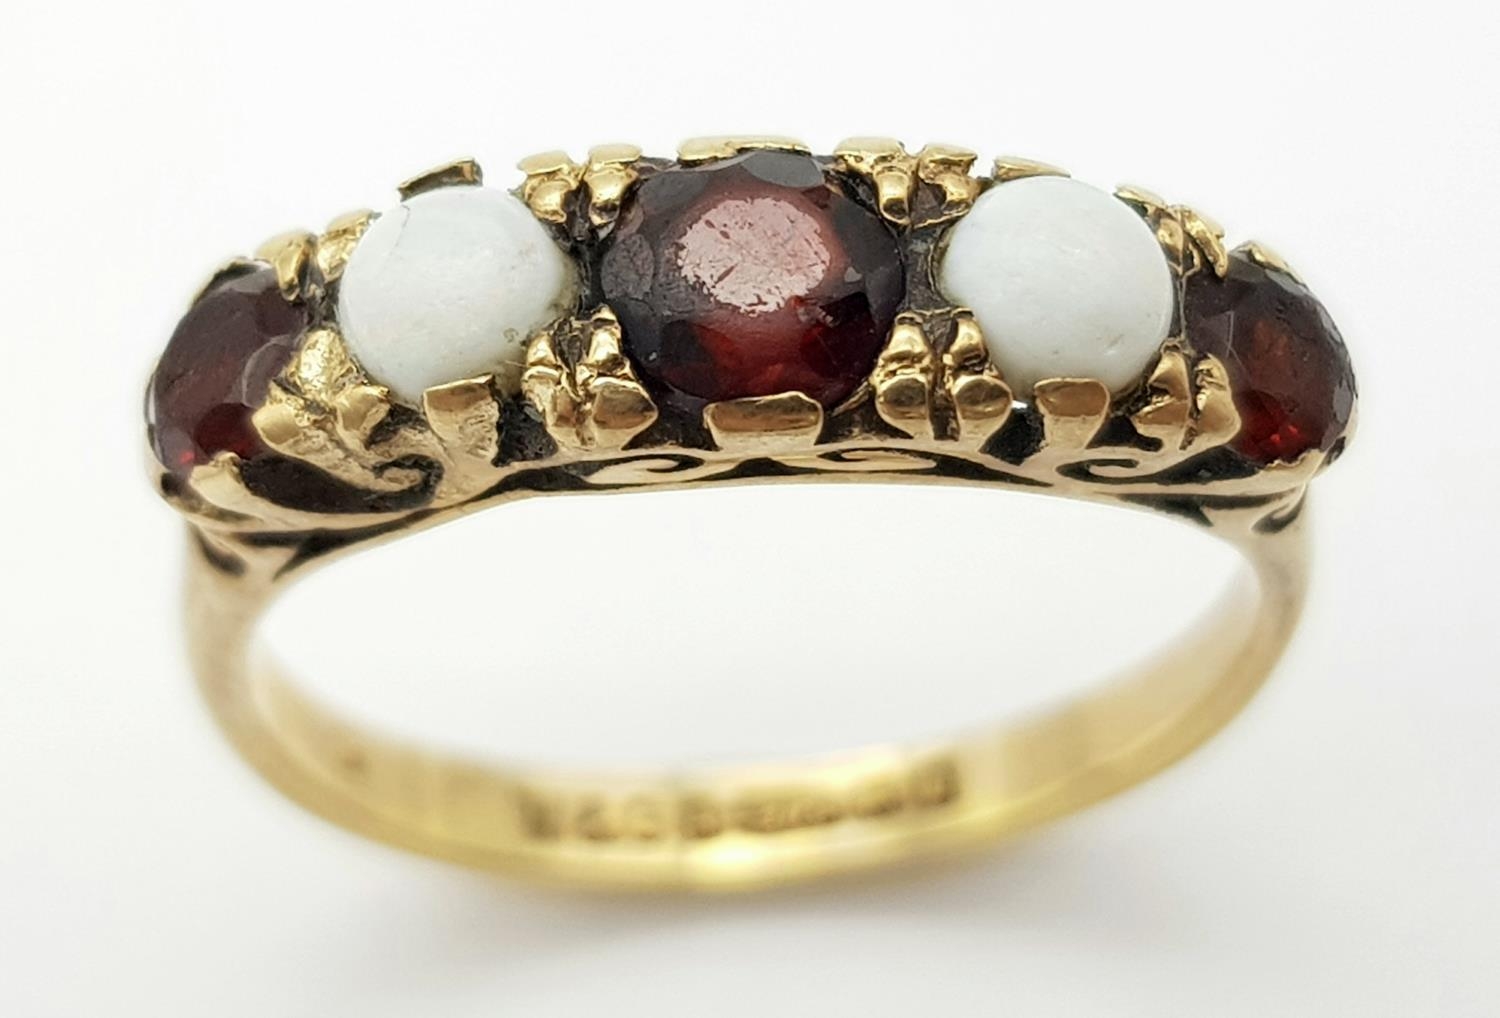 A 9K YELLOW GOLD GARNET & OPAL 5 STONE RING. Size K, 2.1g total weight. Ref: SC 9019 - Image 2 of 5